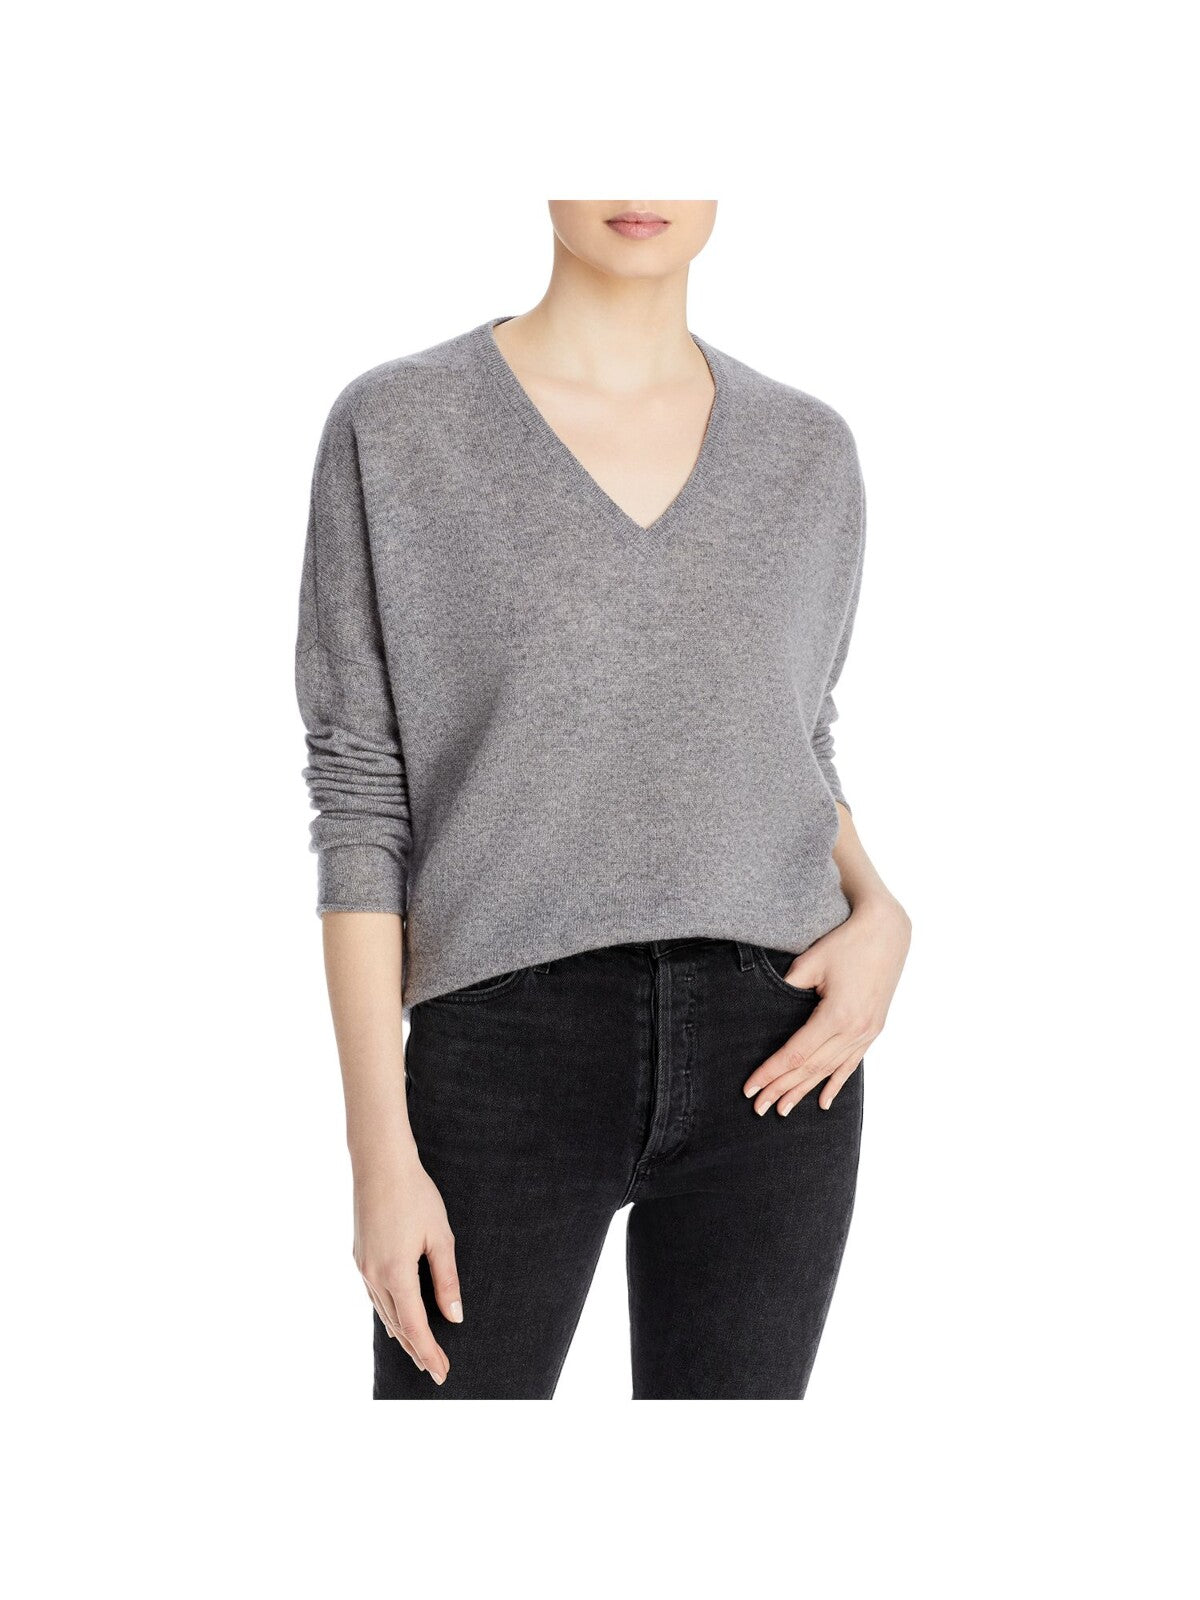 Designer Brand Womens Gray Cashmere Ribbed Pull Over Style Heather Long Sleeve V Neck Wear To Work Top XL